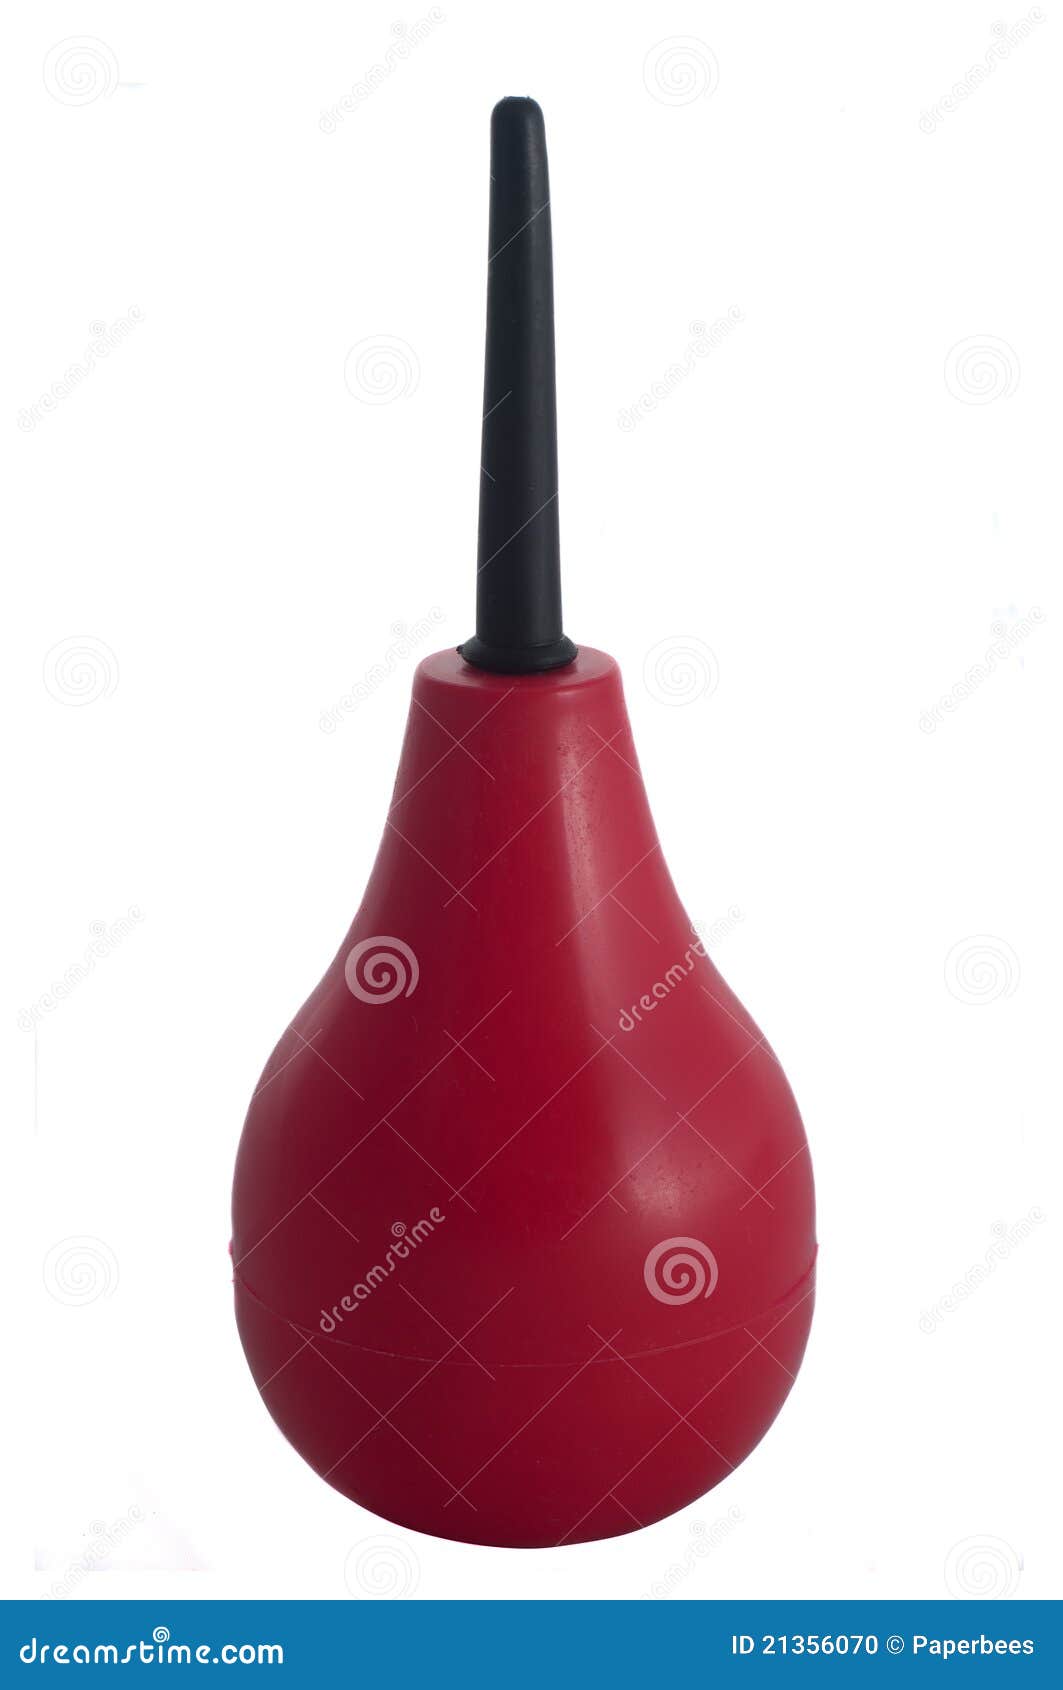 red rubber pear (enema).